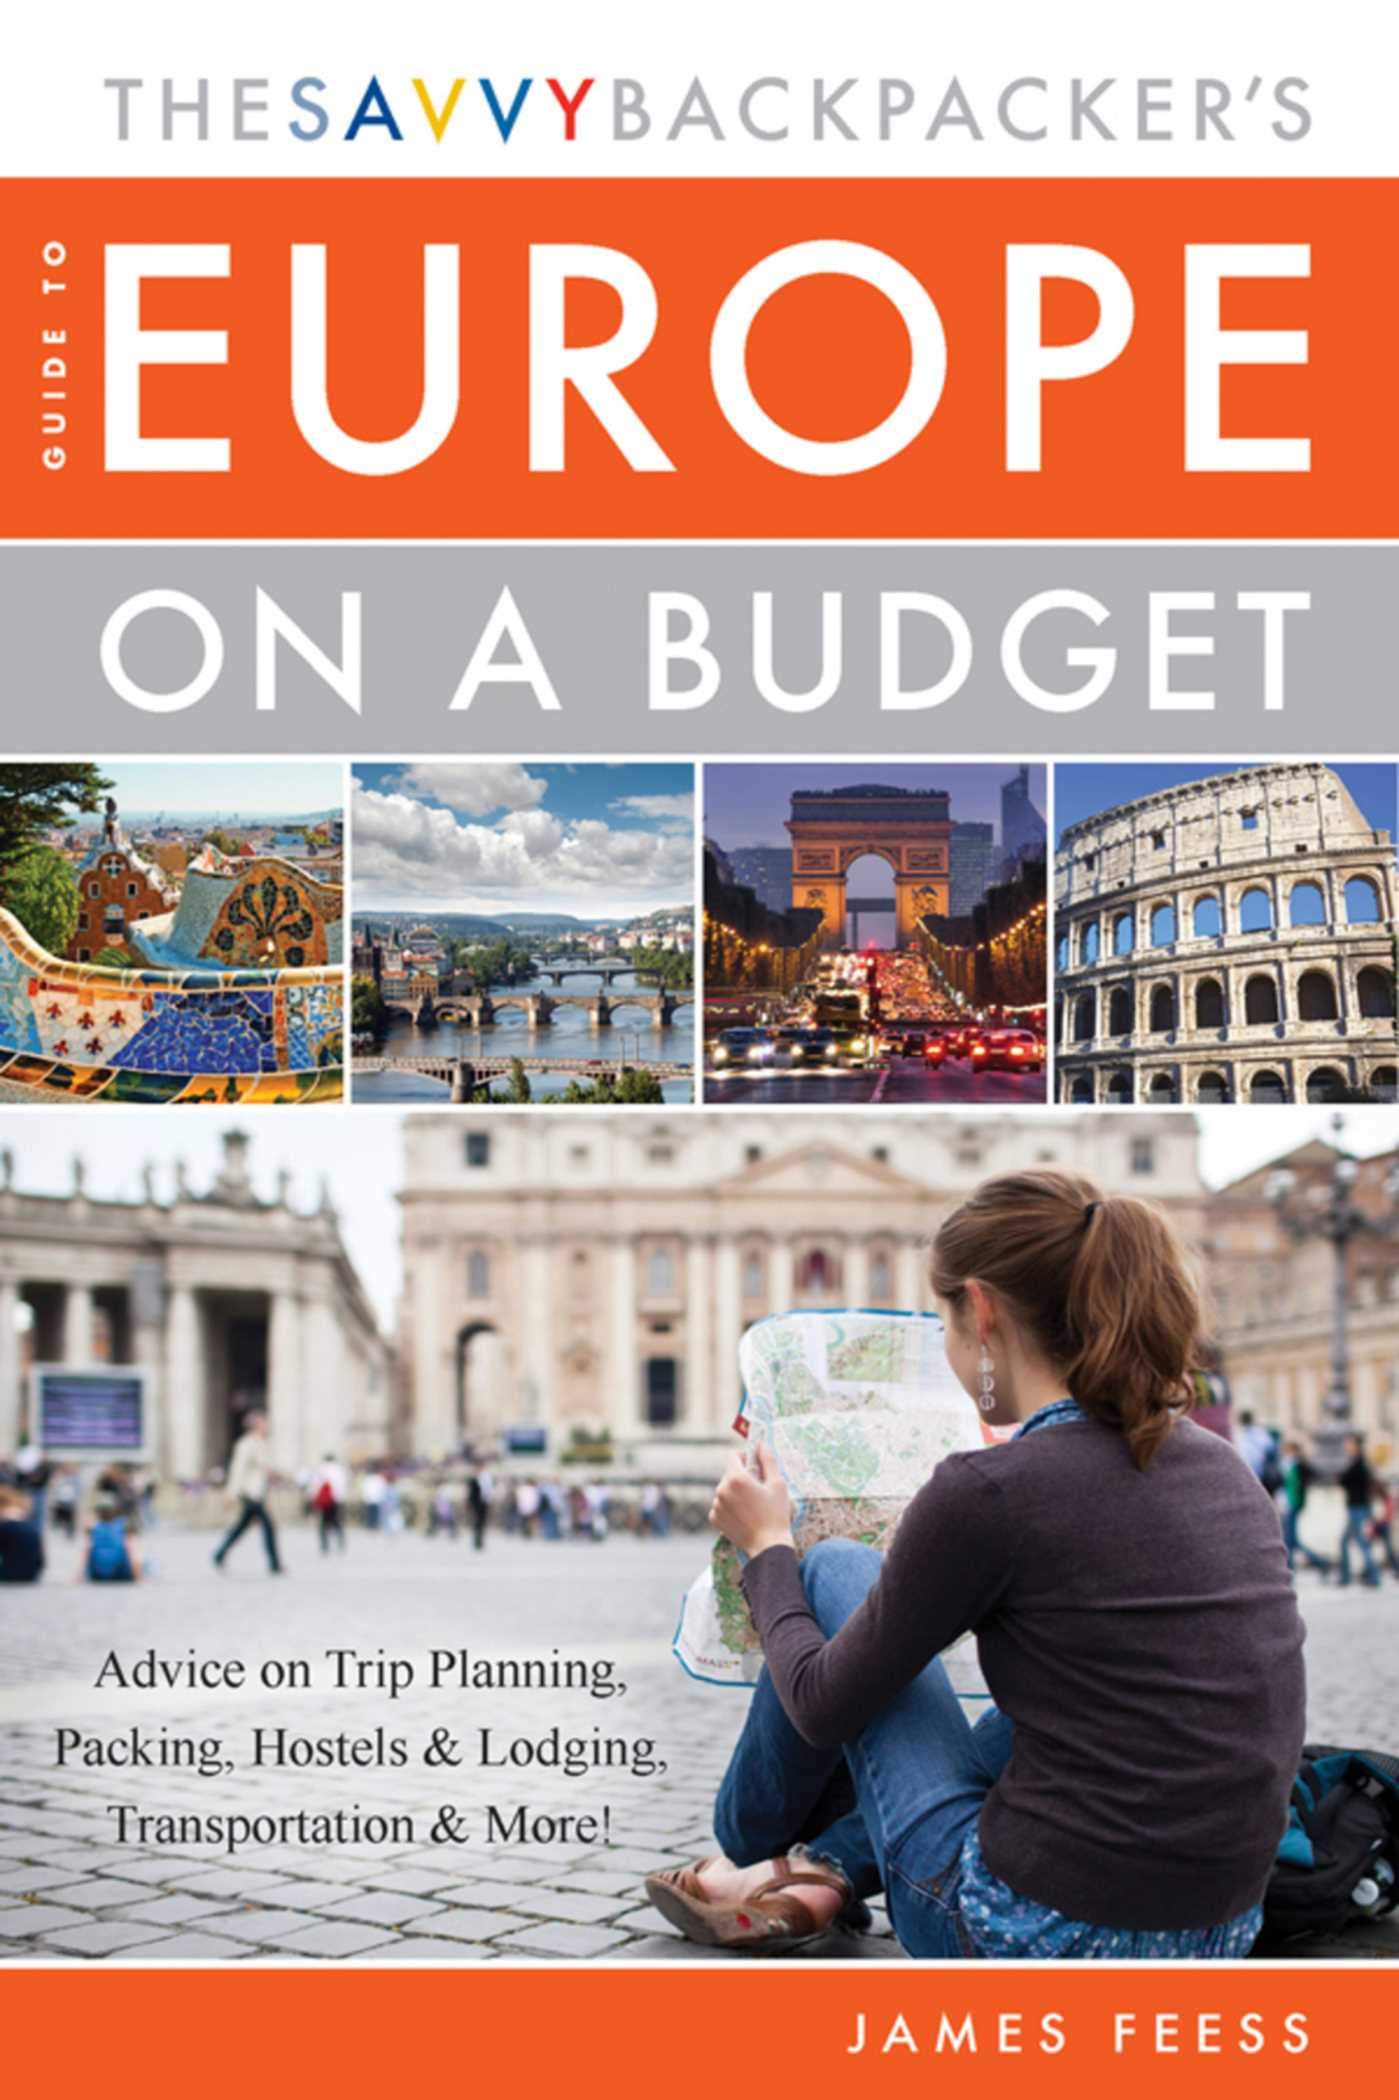 The Savvy Backpacker's Guide to Europe on a Budget: Advice on Trip Planning, Packing, Hostels & Lodging, Transportation & More!